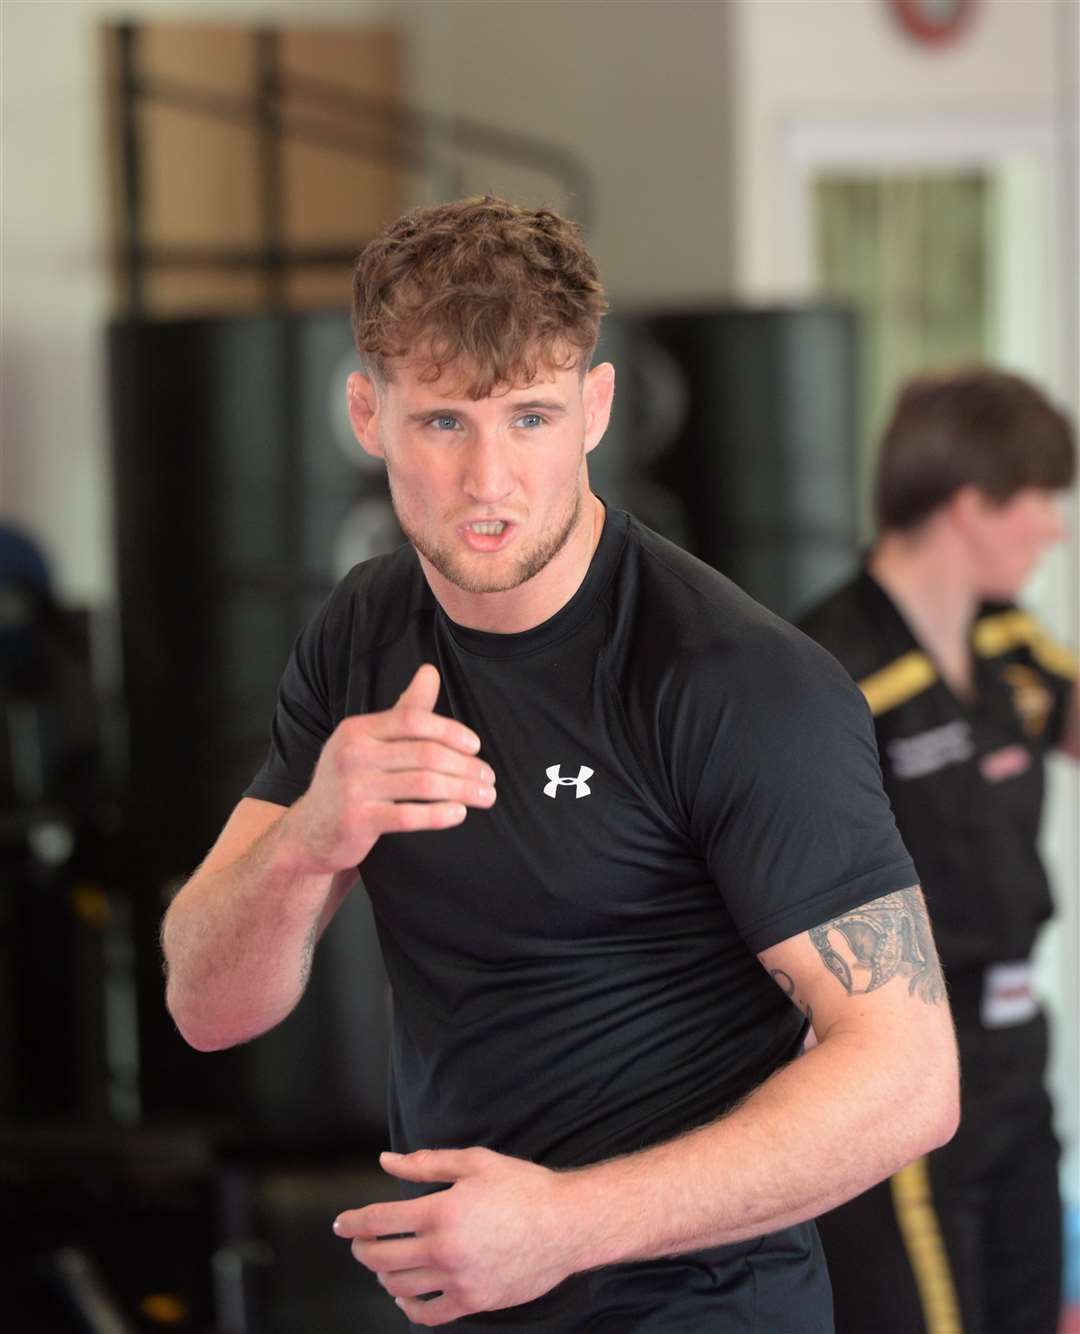 Professional MMA fighter and HMAC owner Ross Houston says he still has ambitions for his own career – although he does not expect an imminent return. Picture: Gary Anthony